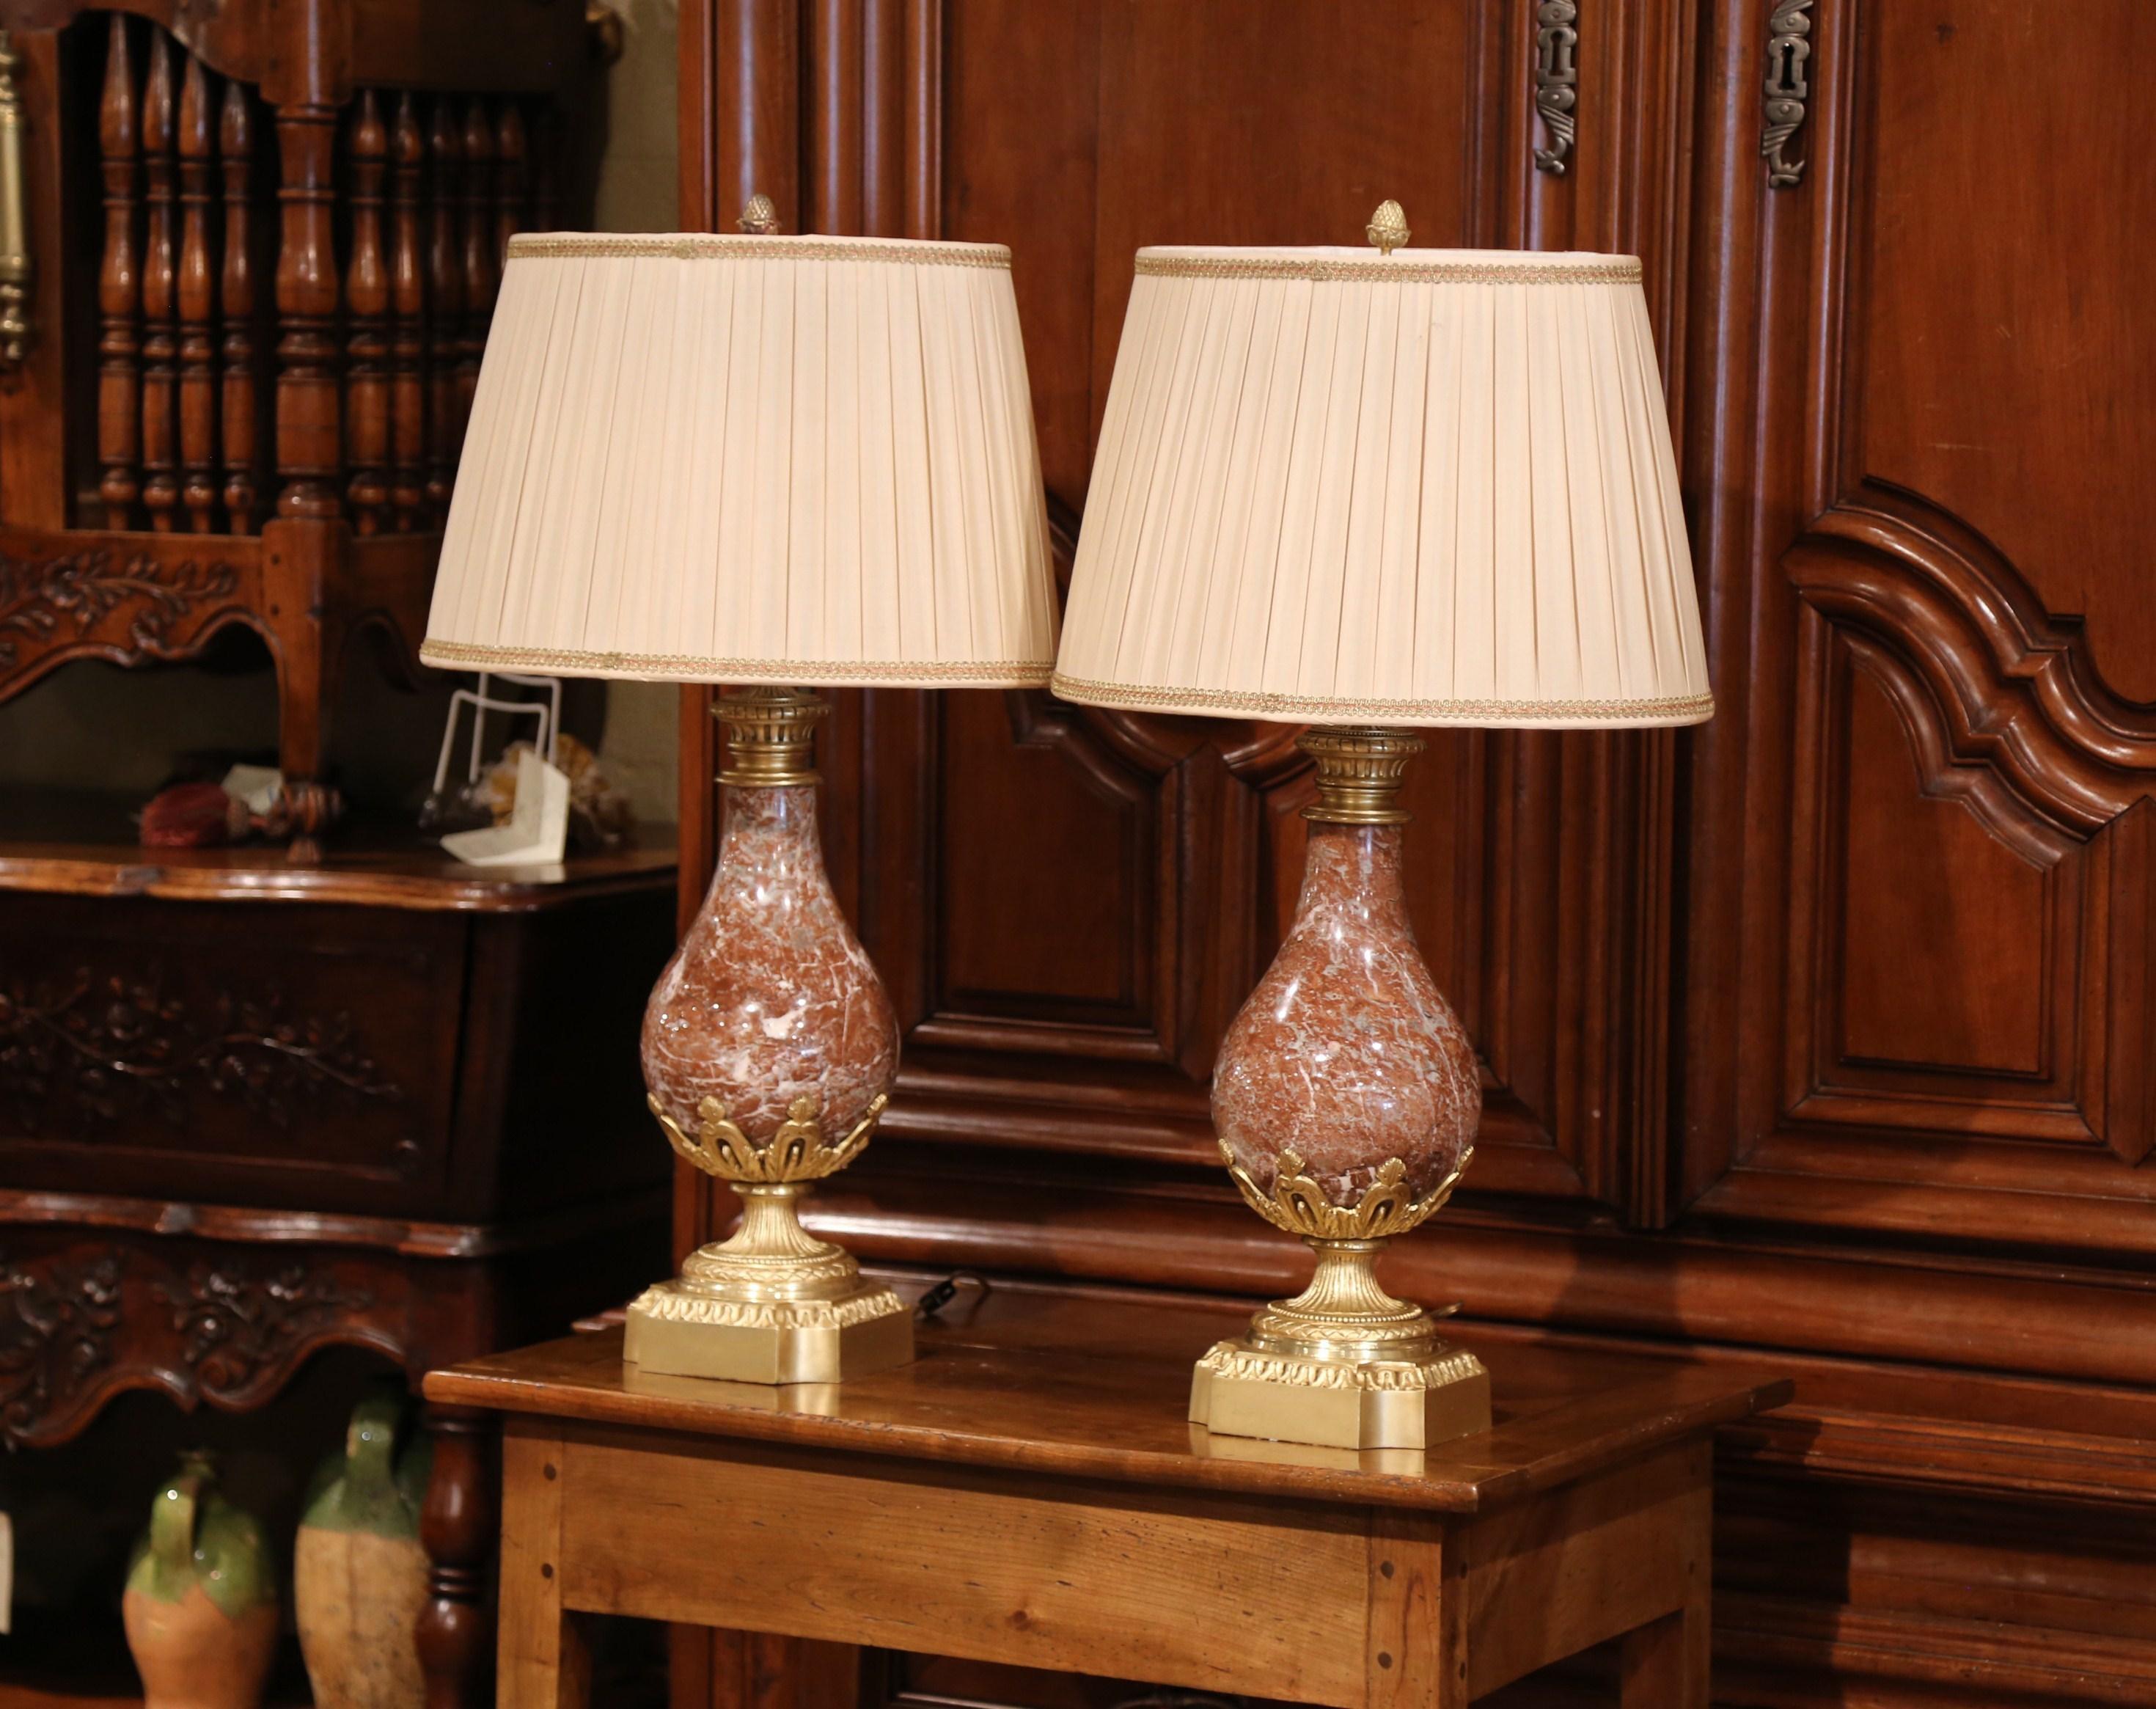 Crafted in France circa 1860, each cassolette is made of carved red marble and is embellished with a bronze base and decorative mounts. The large vessels have been converted into a table lamps decorated with custom, pleated white shades. The urns